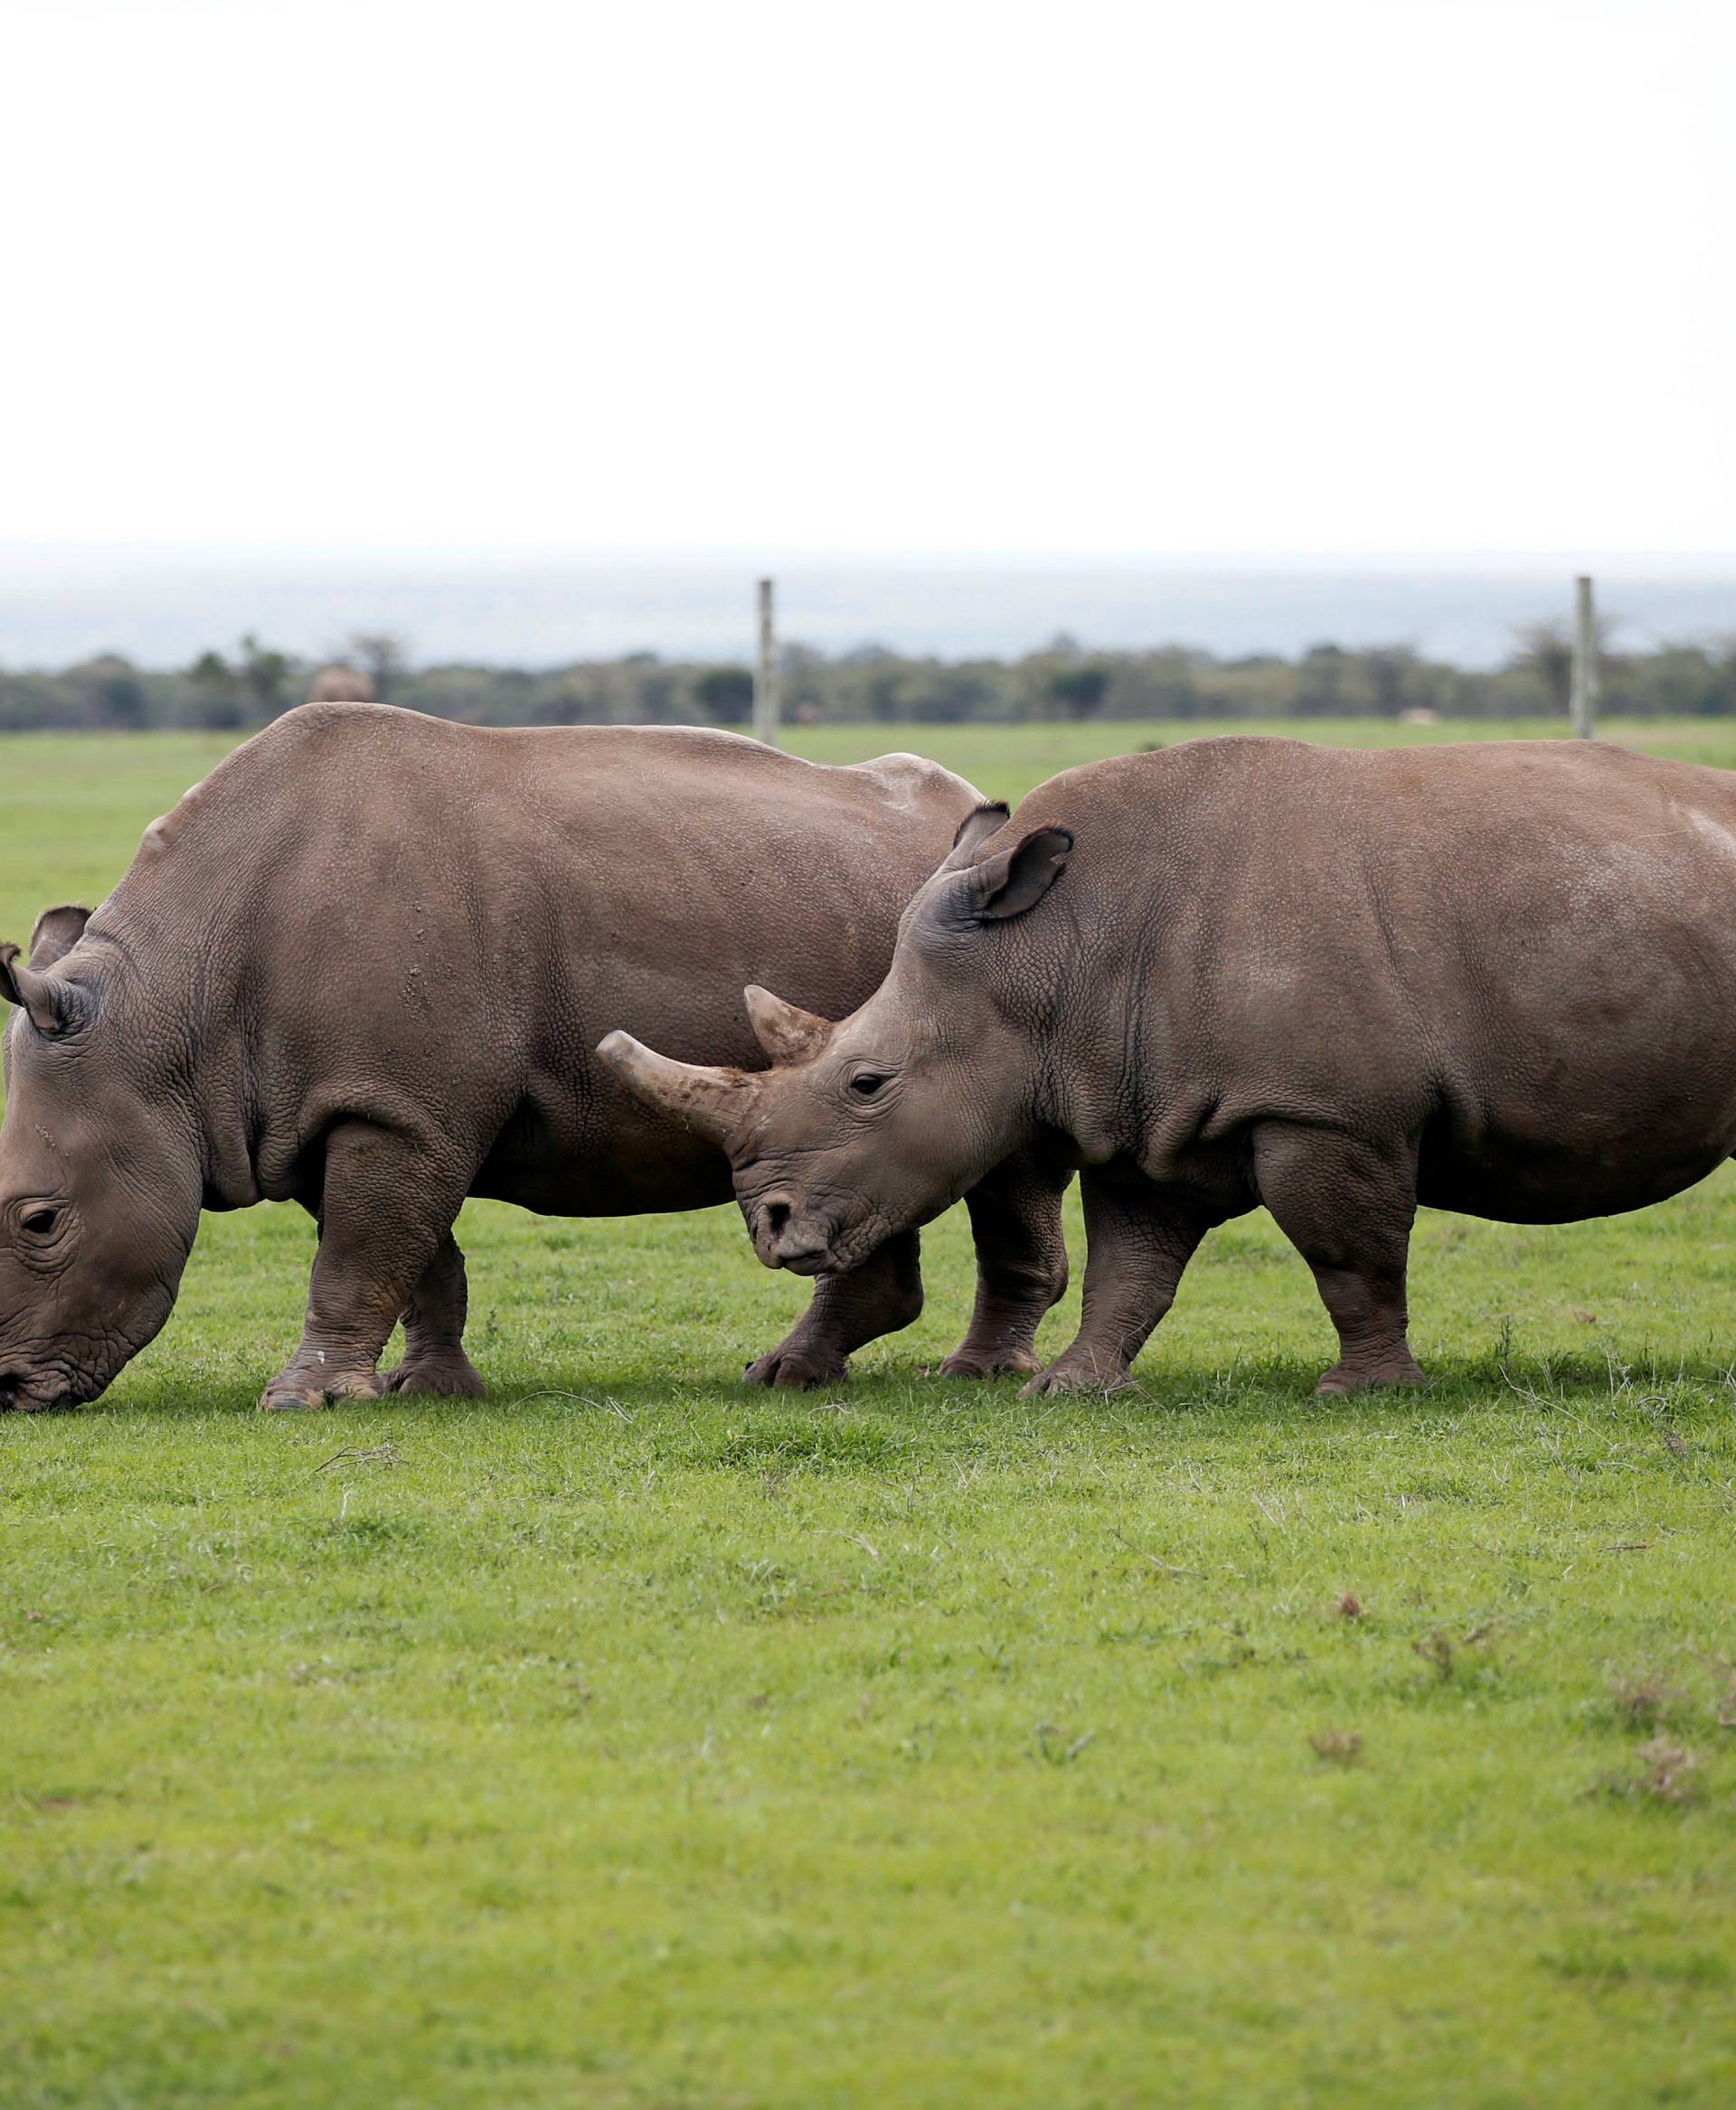 Najin and her daughter Patu, the last two northern white rhino females, graze in their enclosure at the Ol Pejeta Conservancy in Laikipia National Park